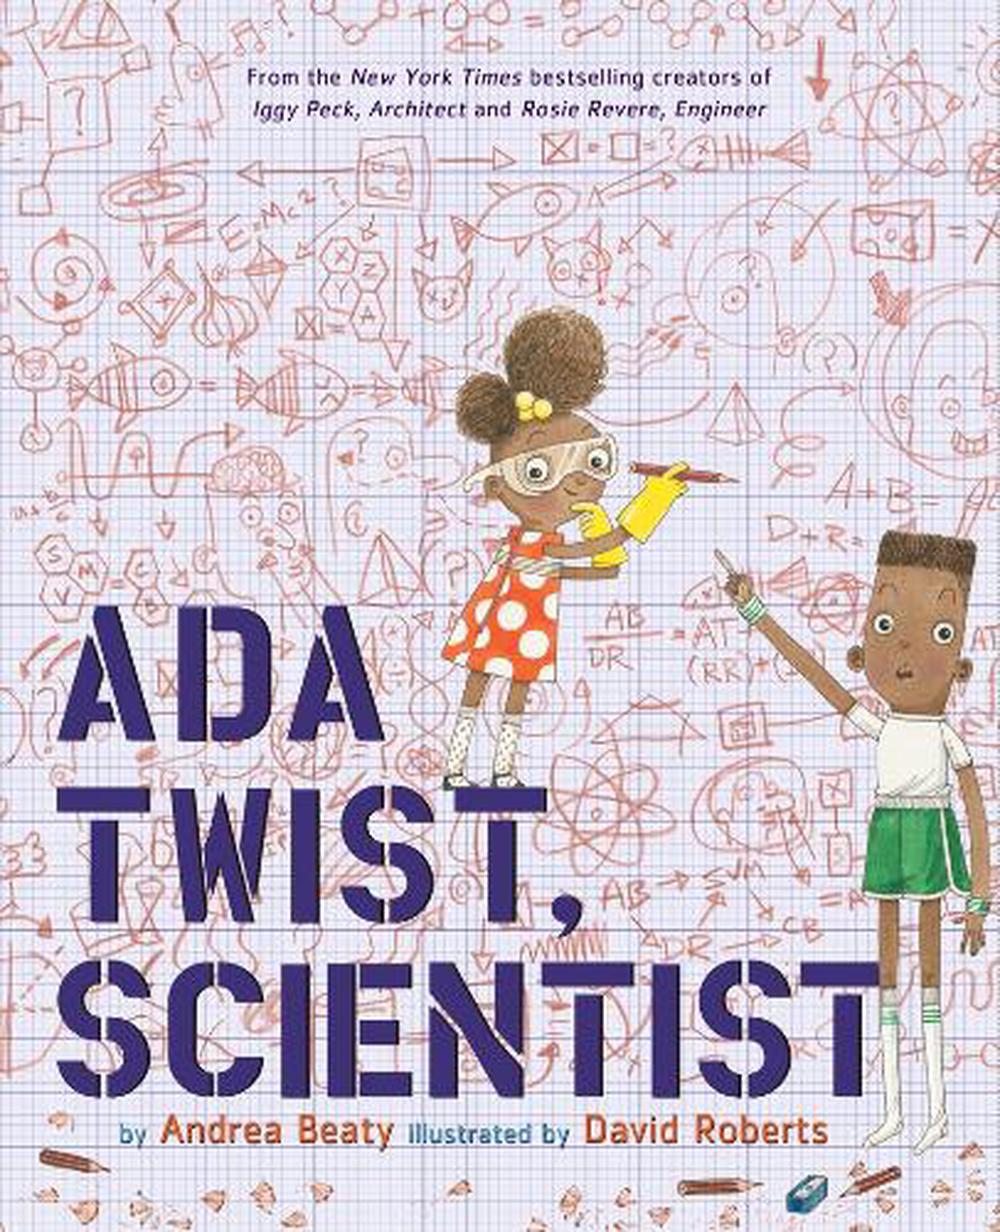 Ada Twist, Scientist by Andrea Beaty, Hardcover, 9781419721373 | Buy online at The Nile